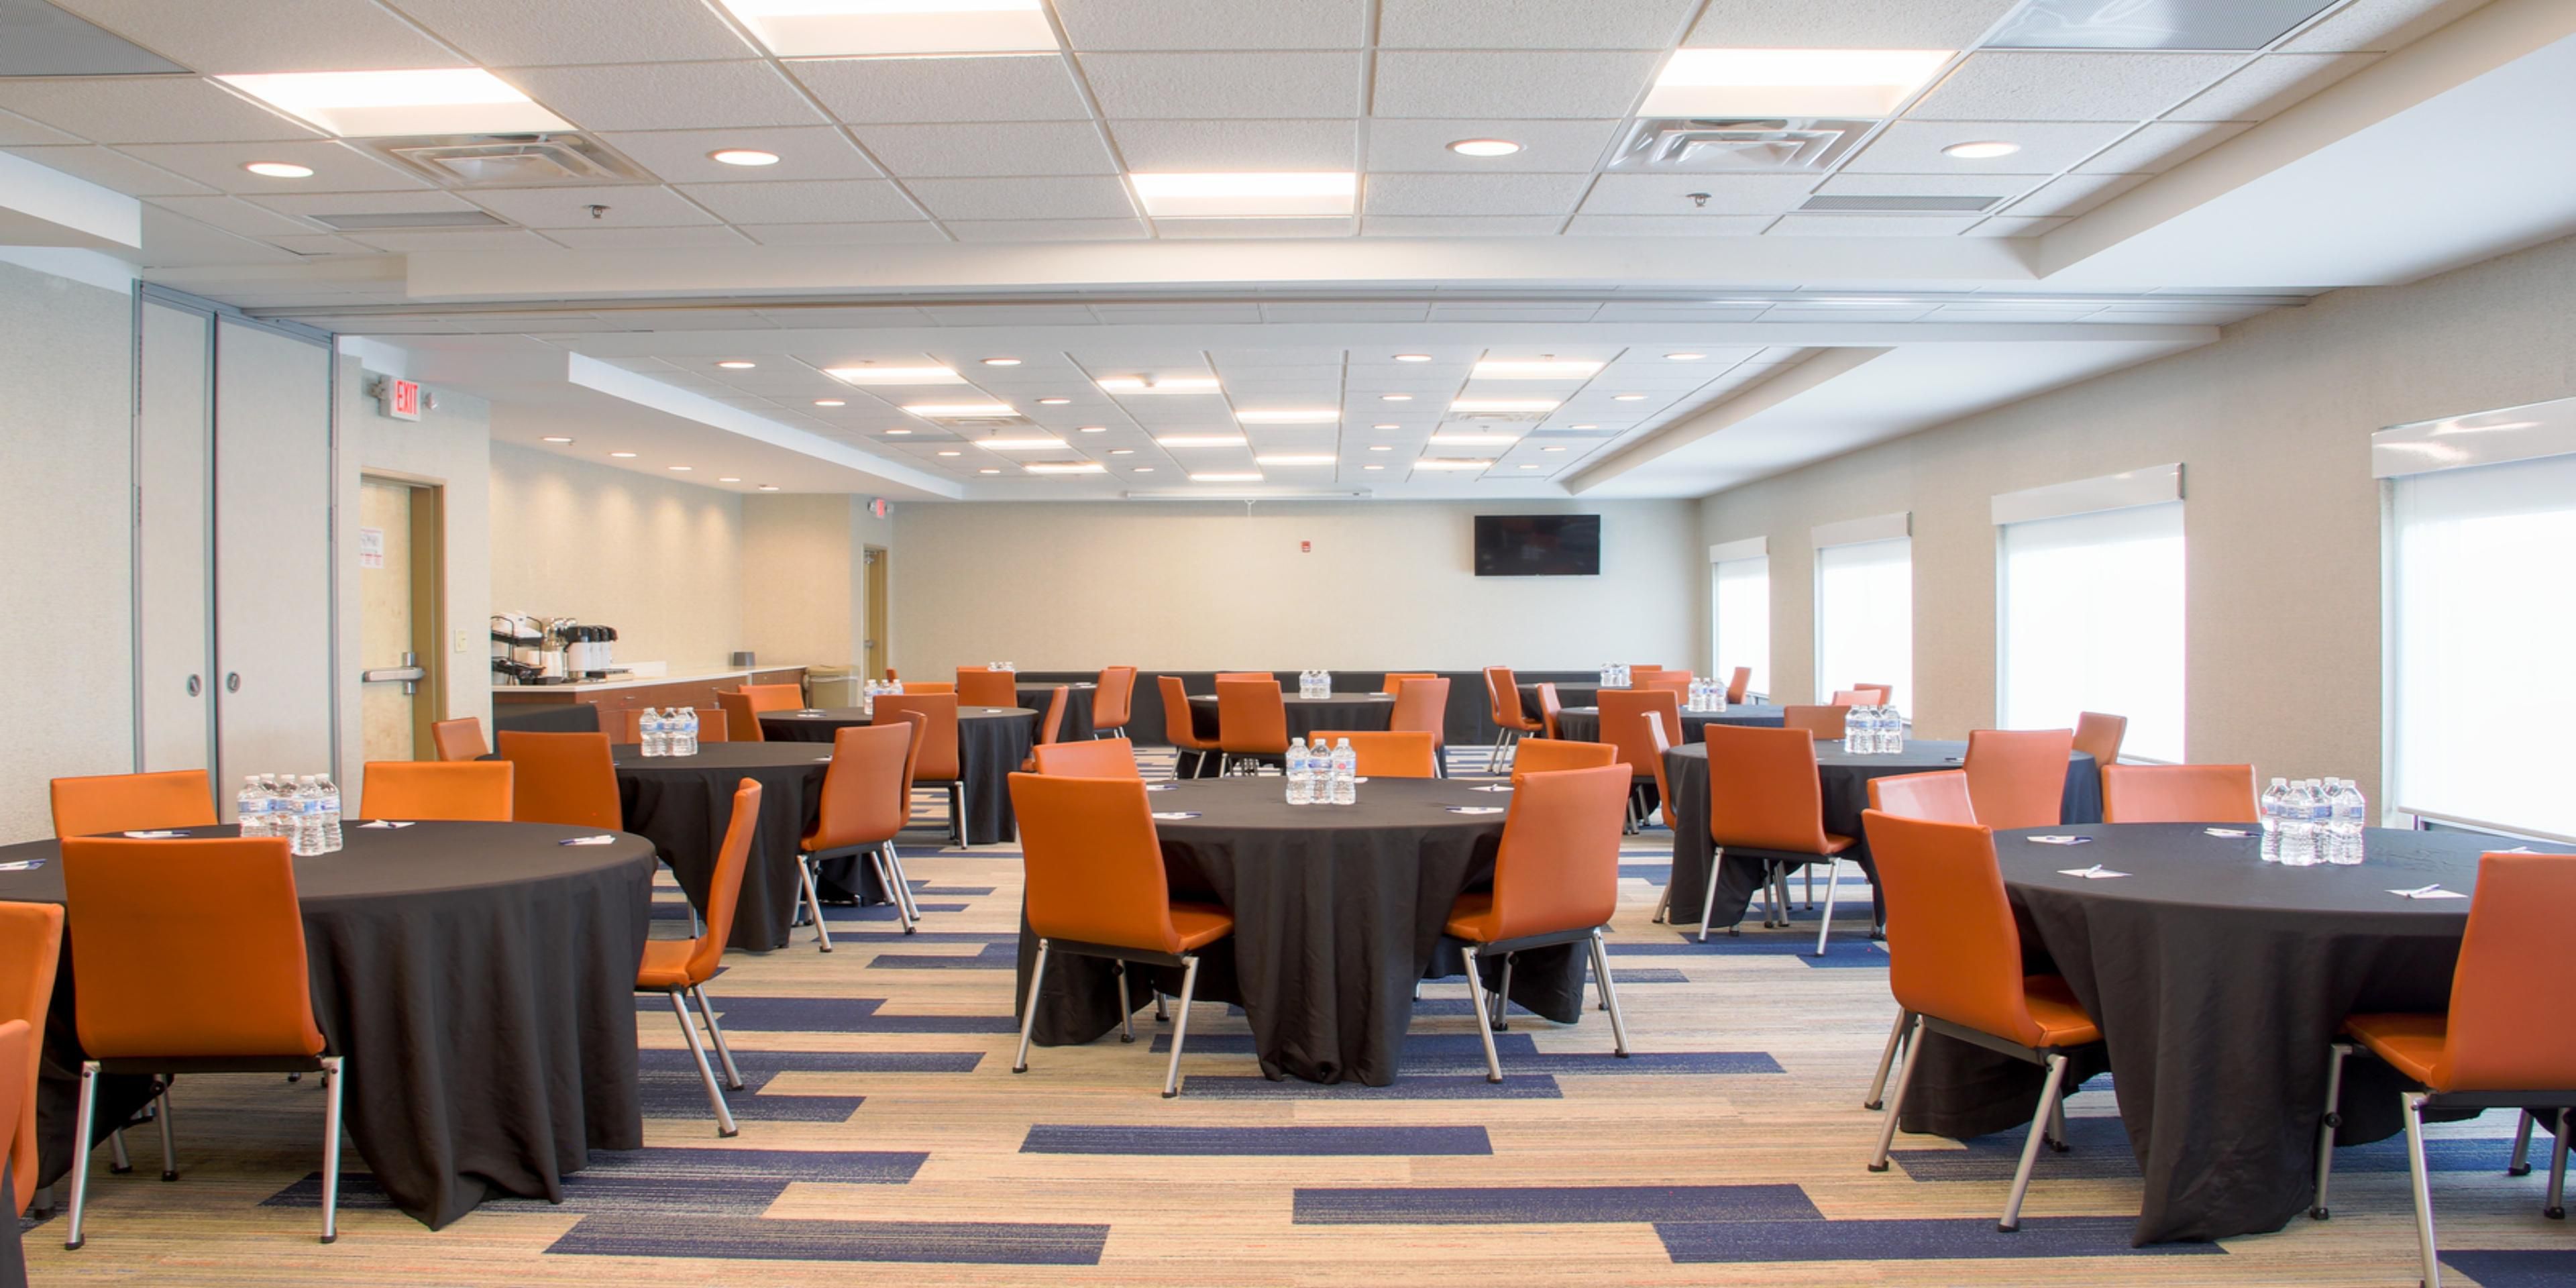 With 1750 sq. ft. of meeting space, we can seat up to 100 people. The room can be sectioned off into two smaller meeting spaces seating 35 and 65 people. We also have a board room that seats up to 25 people. Use the space for a meeting, party, gathering area, a dinner, etc. Projector/screen, TV, HDMI hook-up, sound system, podium, etc. available.